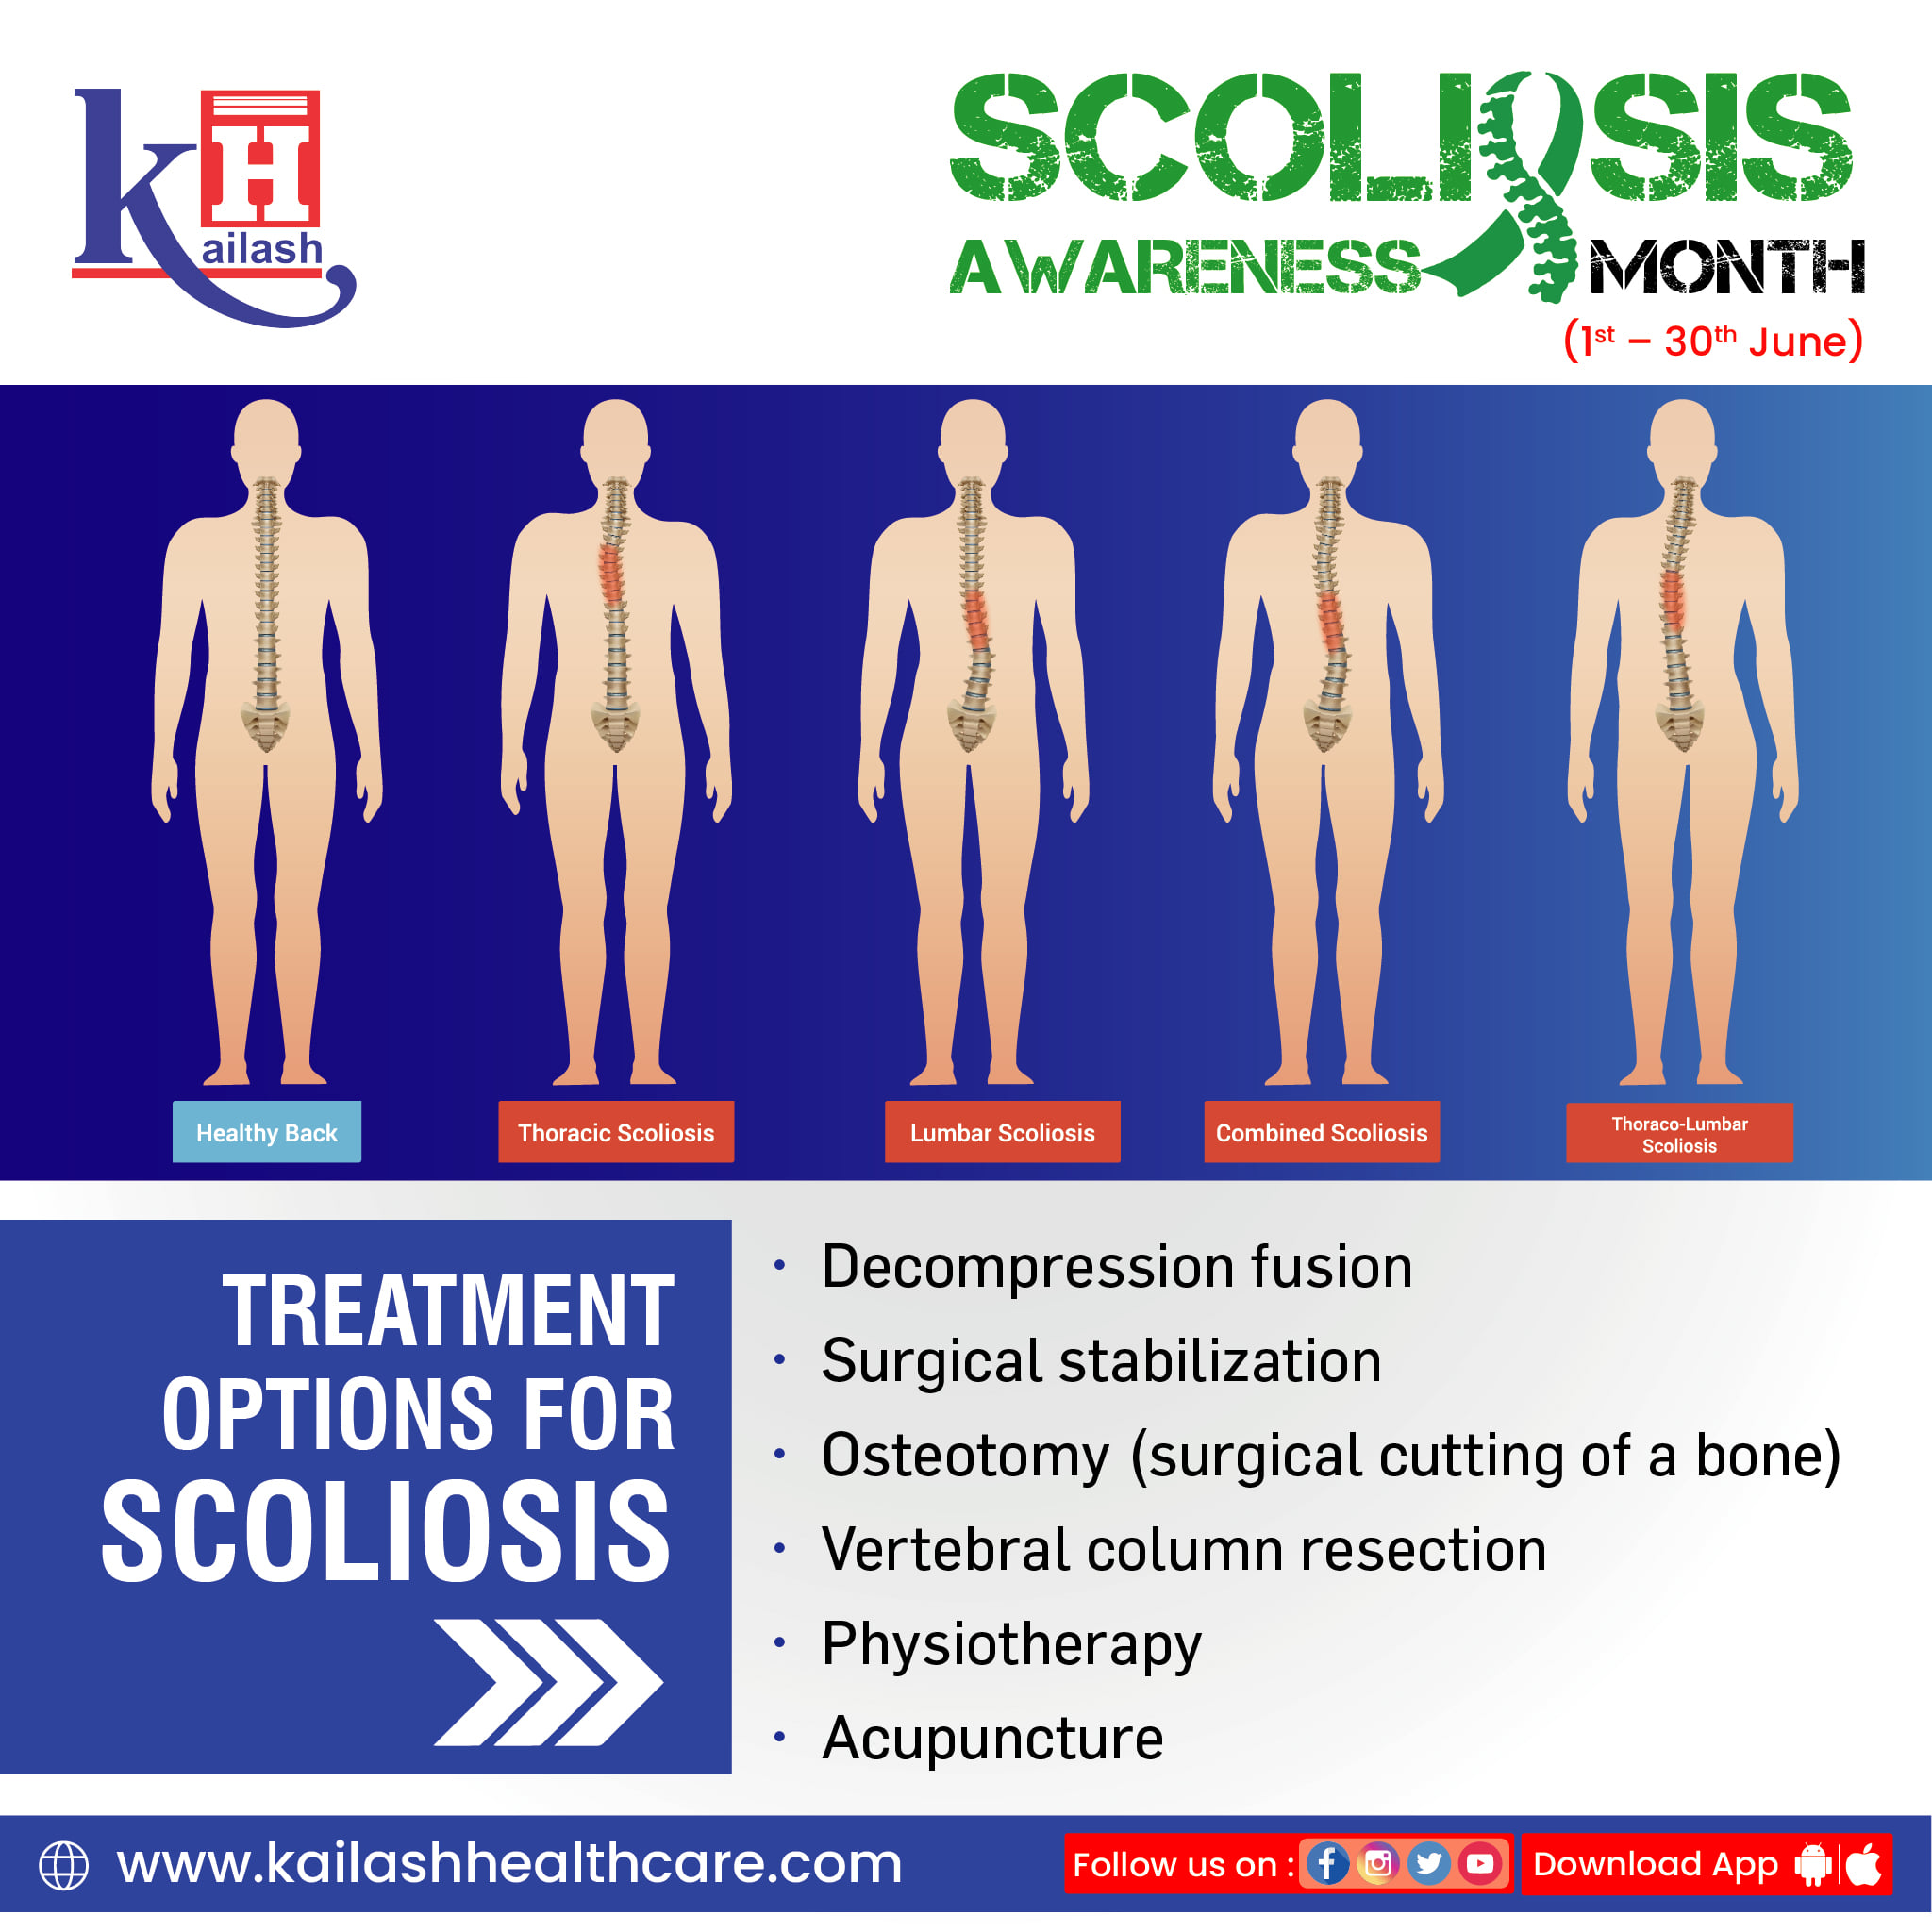 Structural Scoliosis is permanent or a birth defect while Nonstructural Scoliosis describes temporary curves that can be fixed.